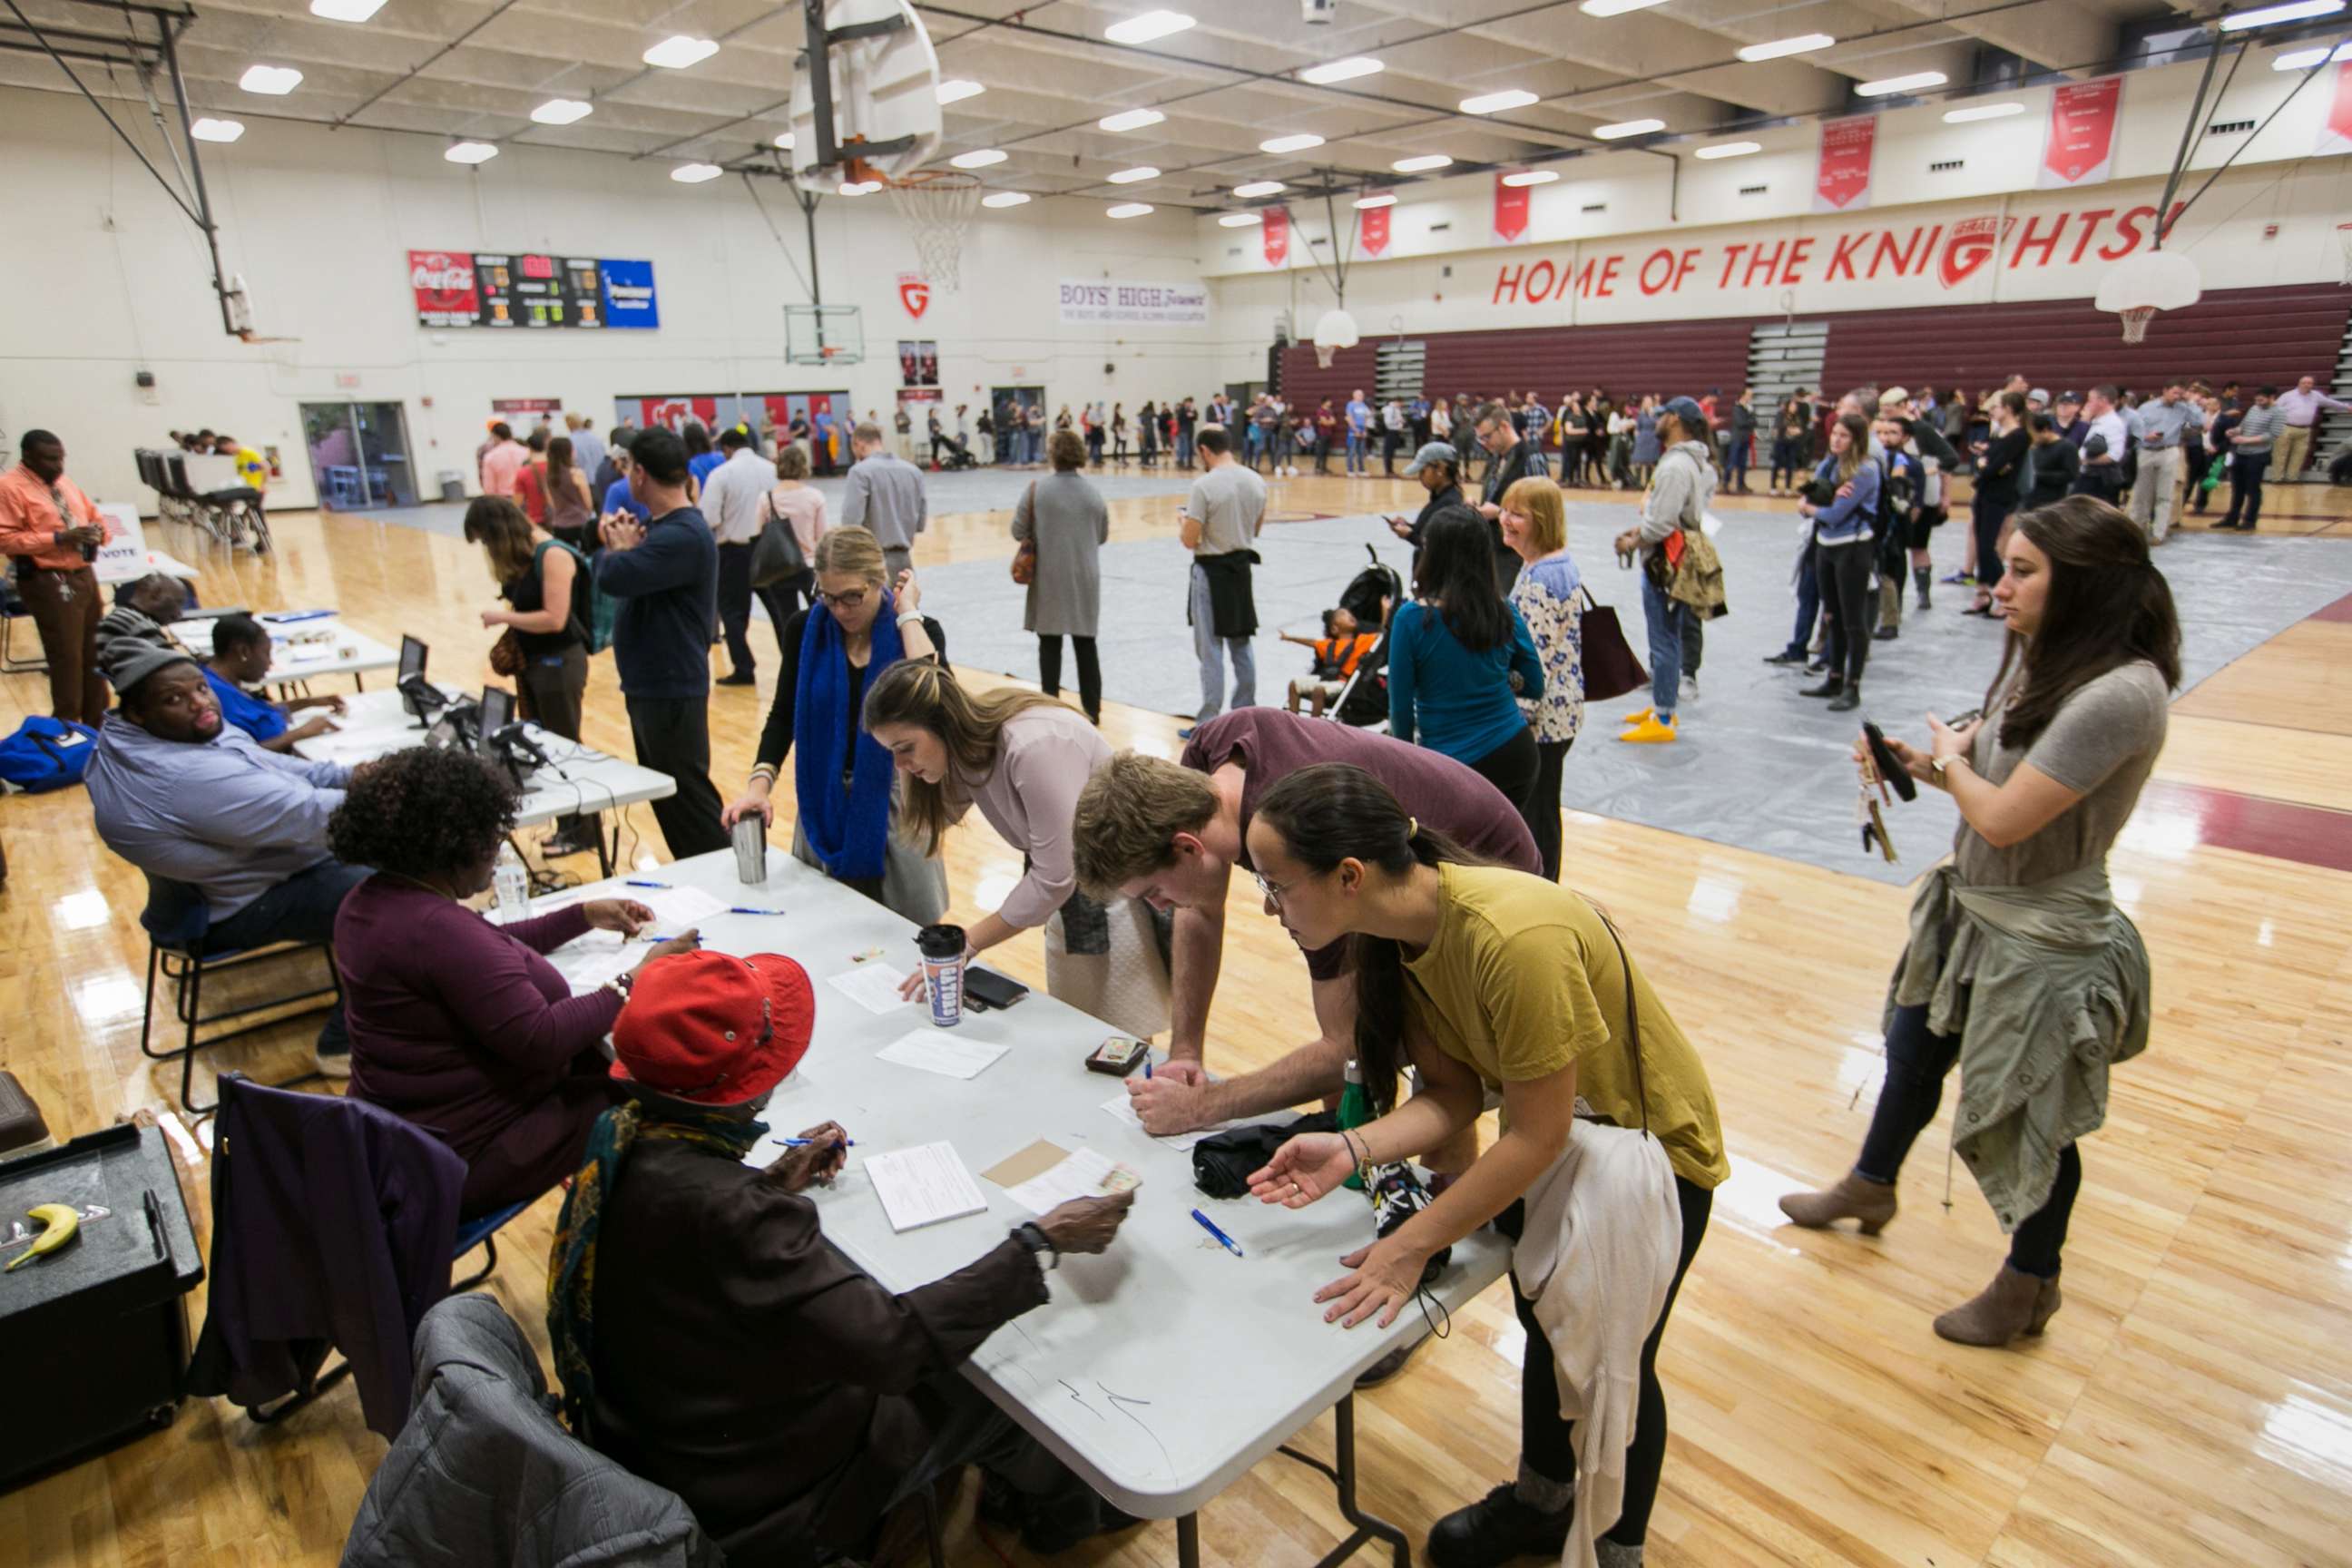 PHOTO: Voters line up to cast their ballots at a polling station set up at Grady High School for the mid-term elections, Nov. 6, 2018 in Atlanta.